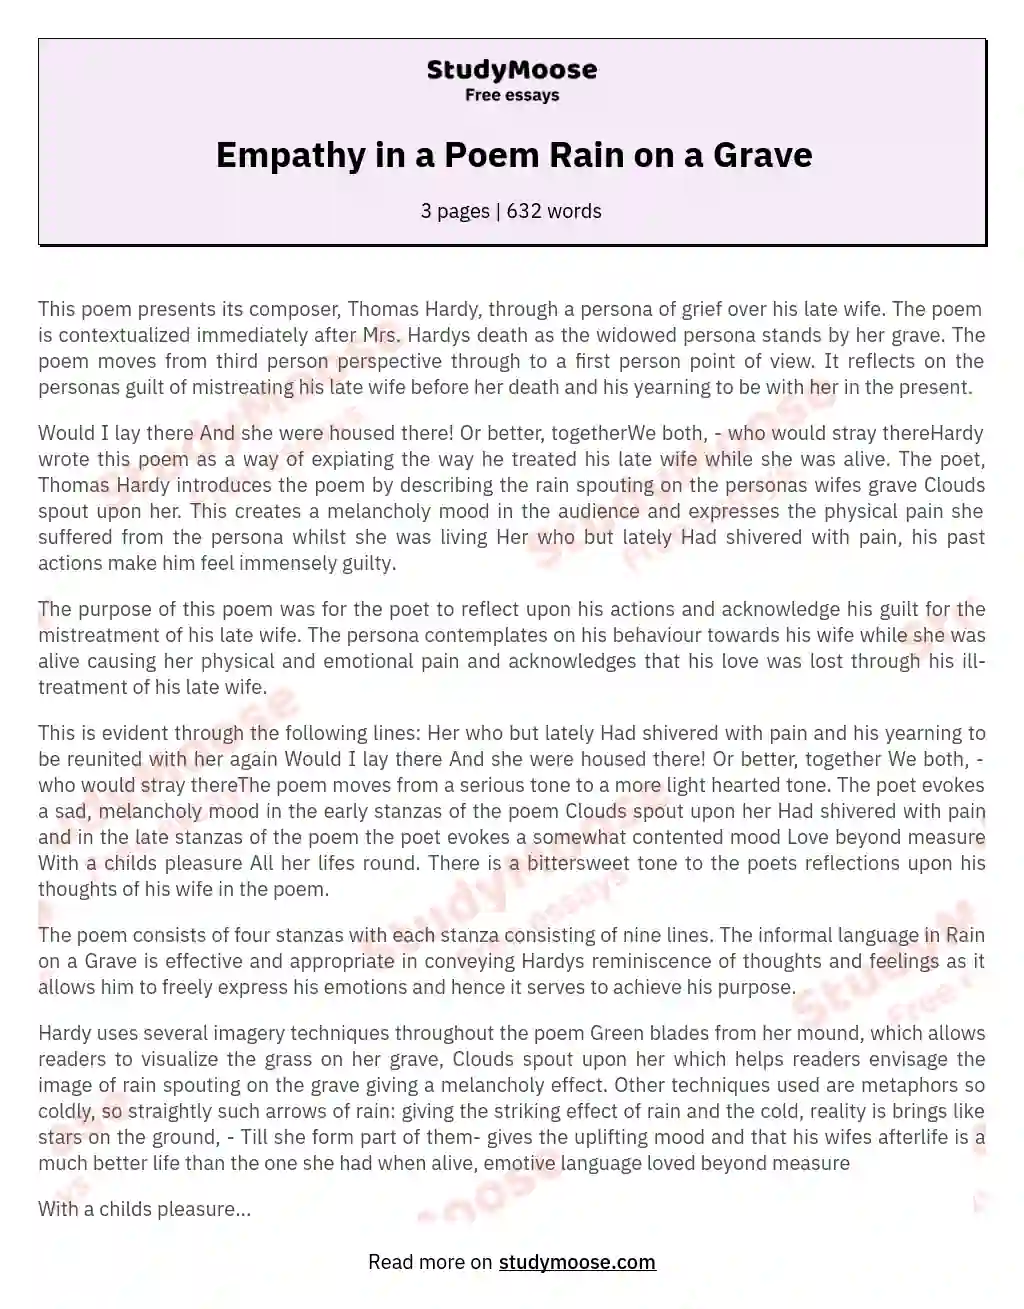 Empathy in a Poem Rain on a Grave essay